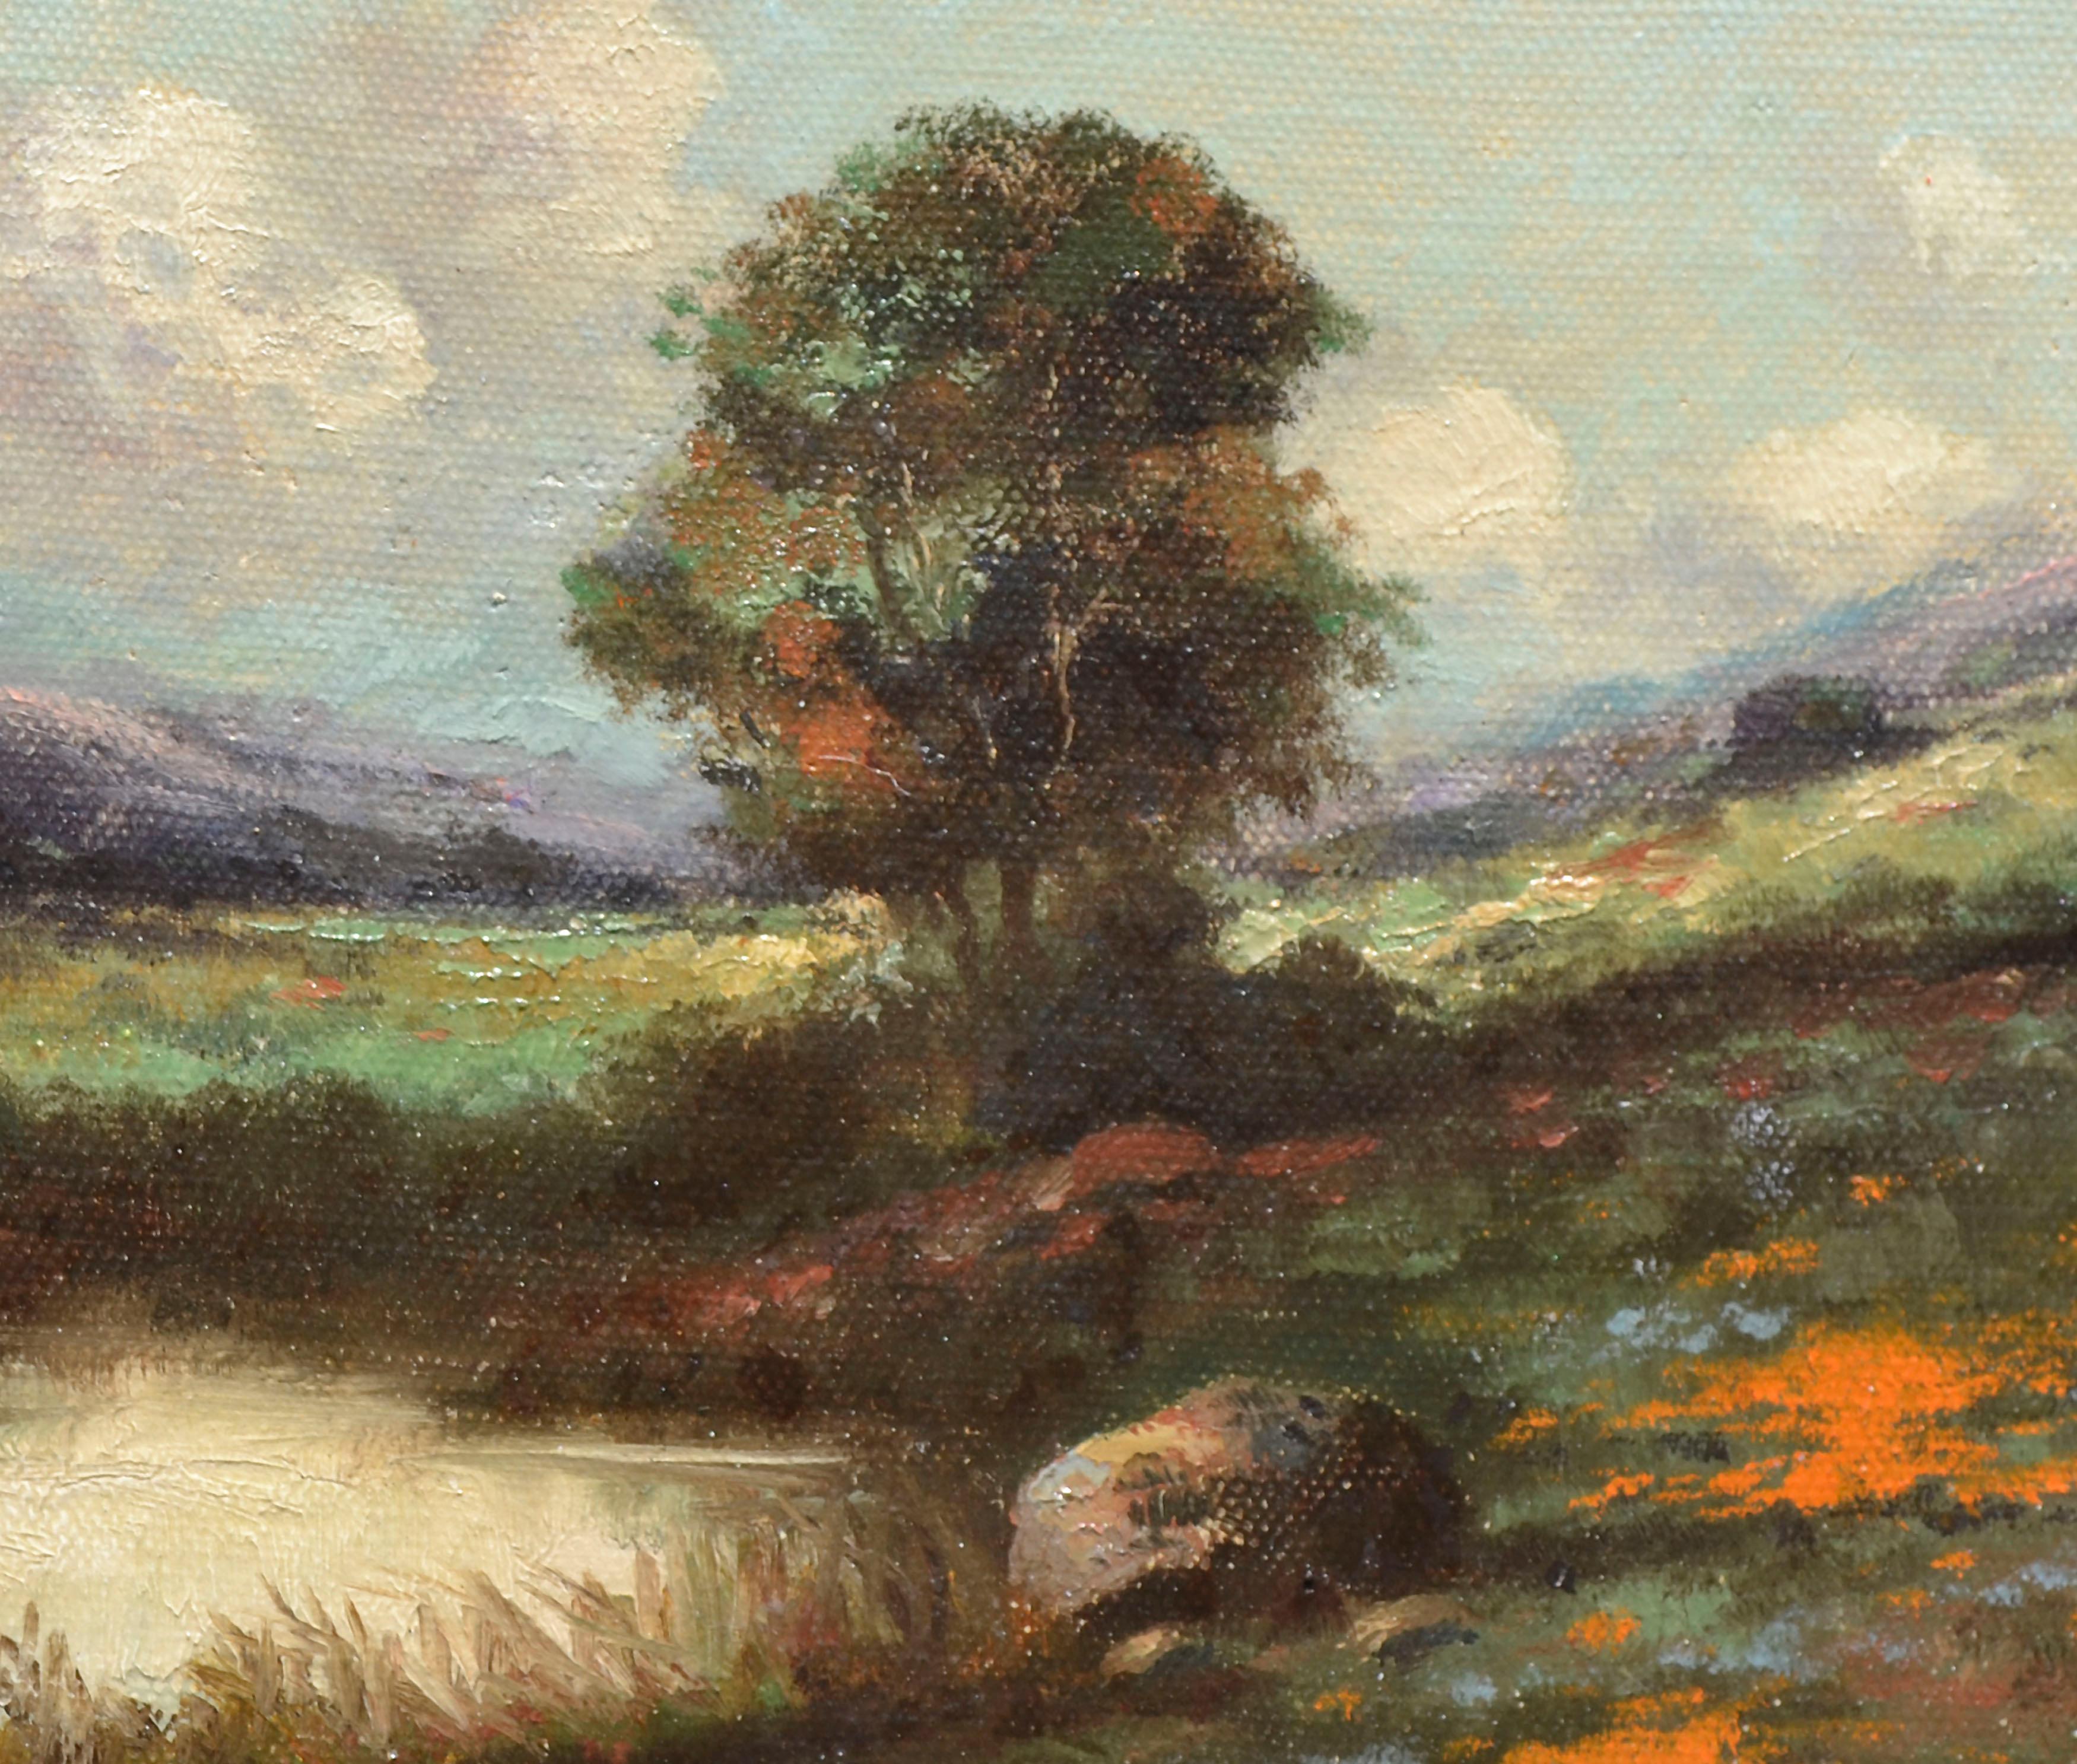 Landscape of San Rafael Looking Toward Mt. Tamalpais - DeTreville - American Impressionist Painting by Unknown